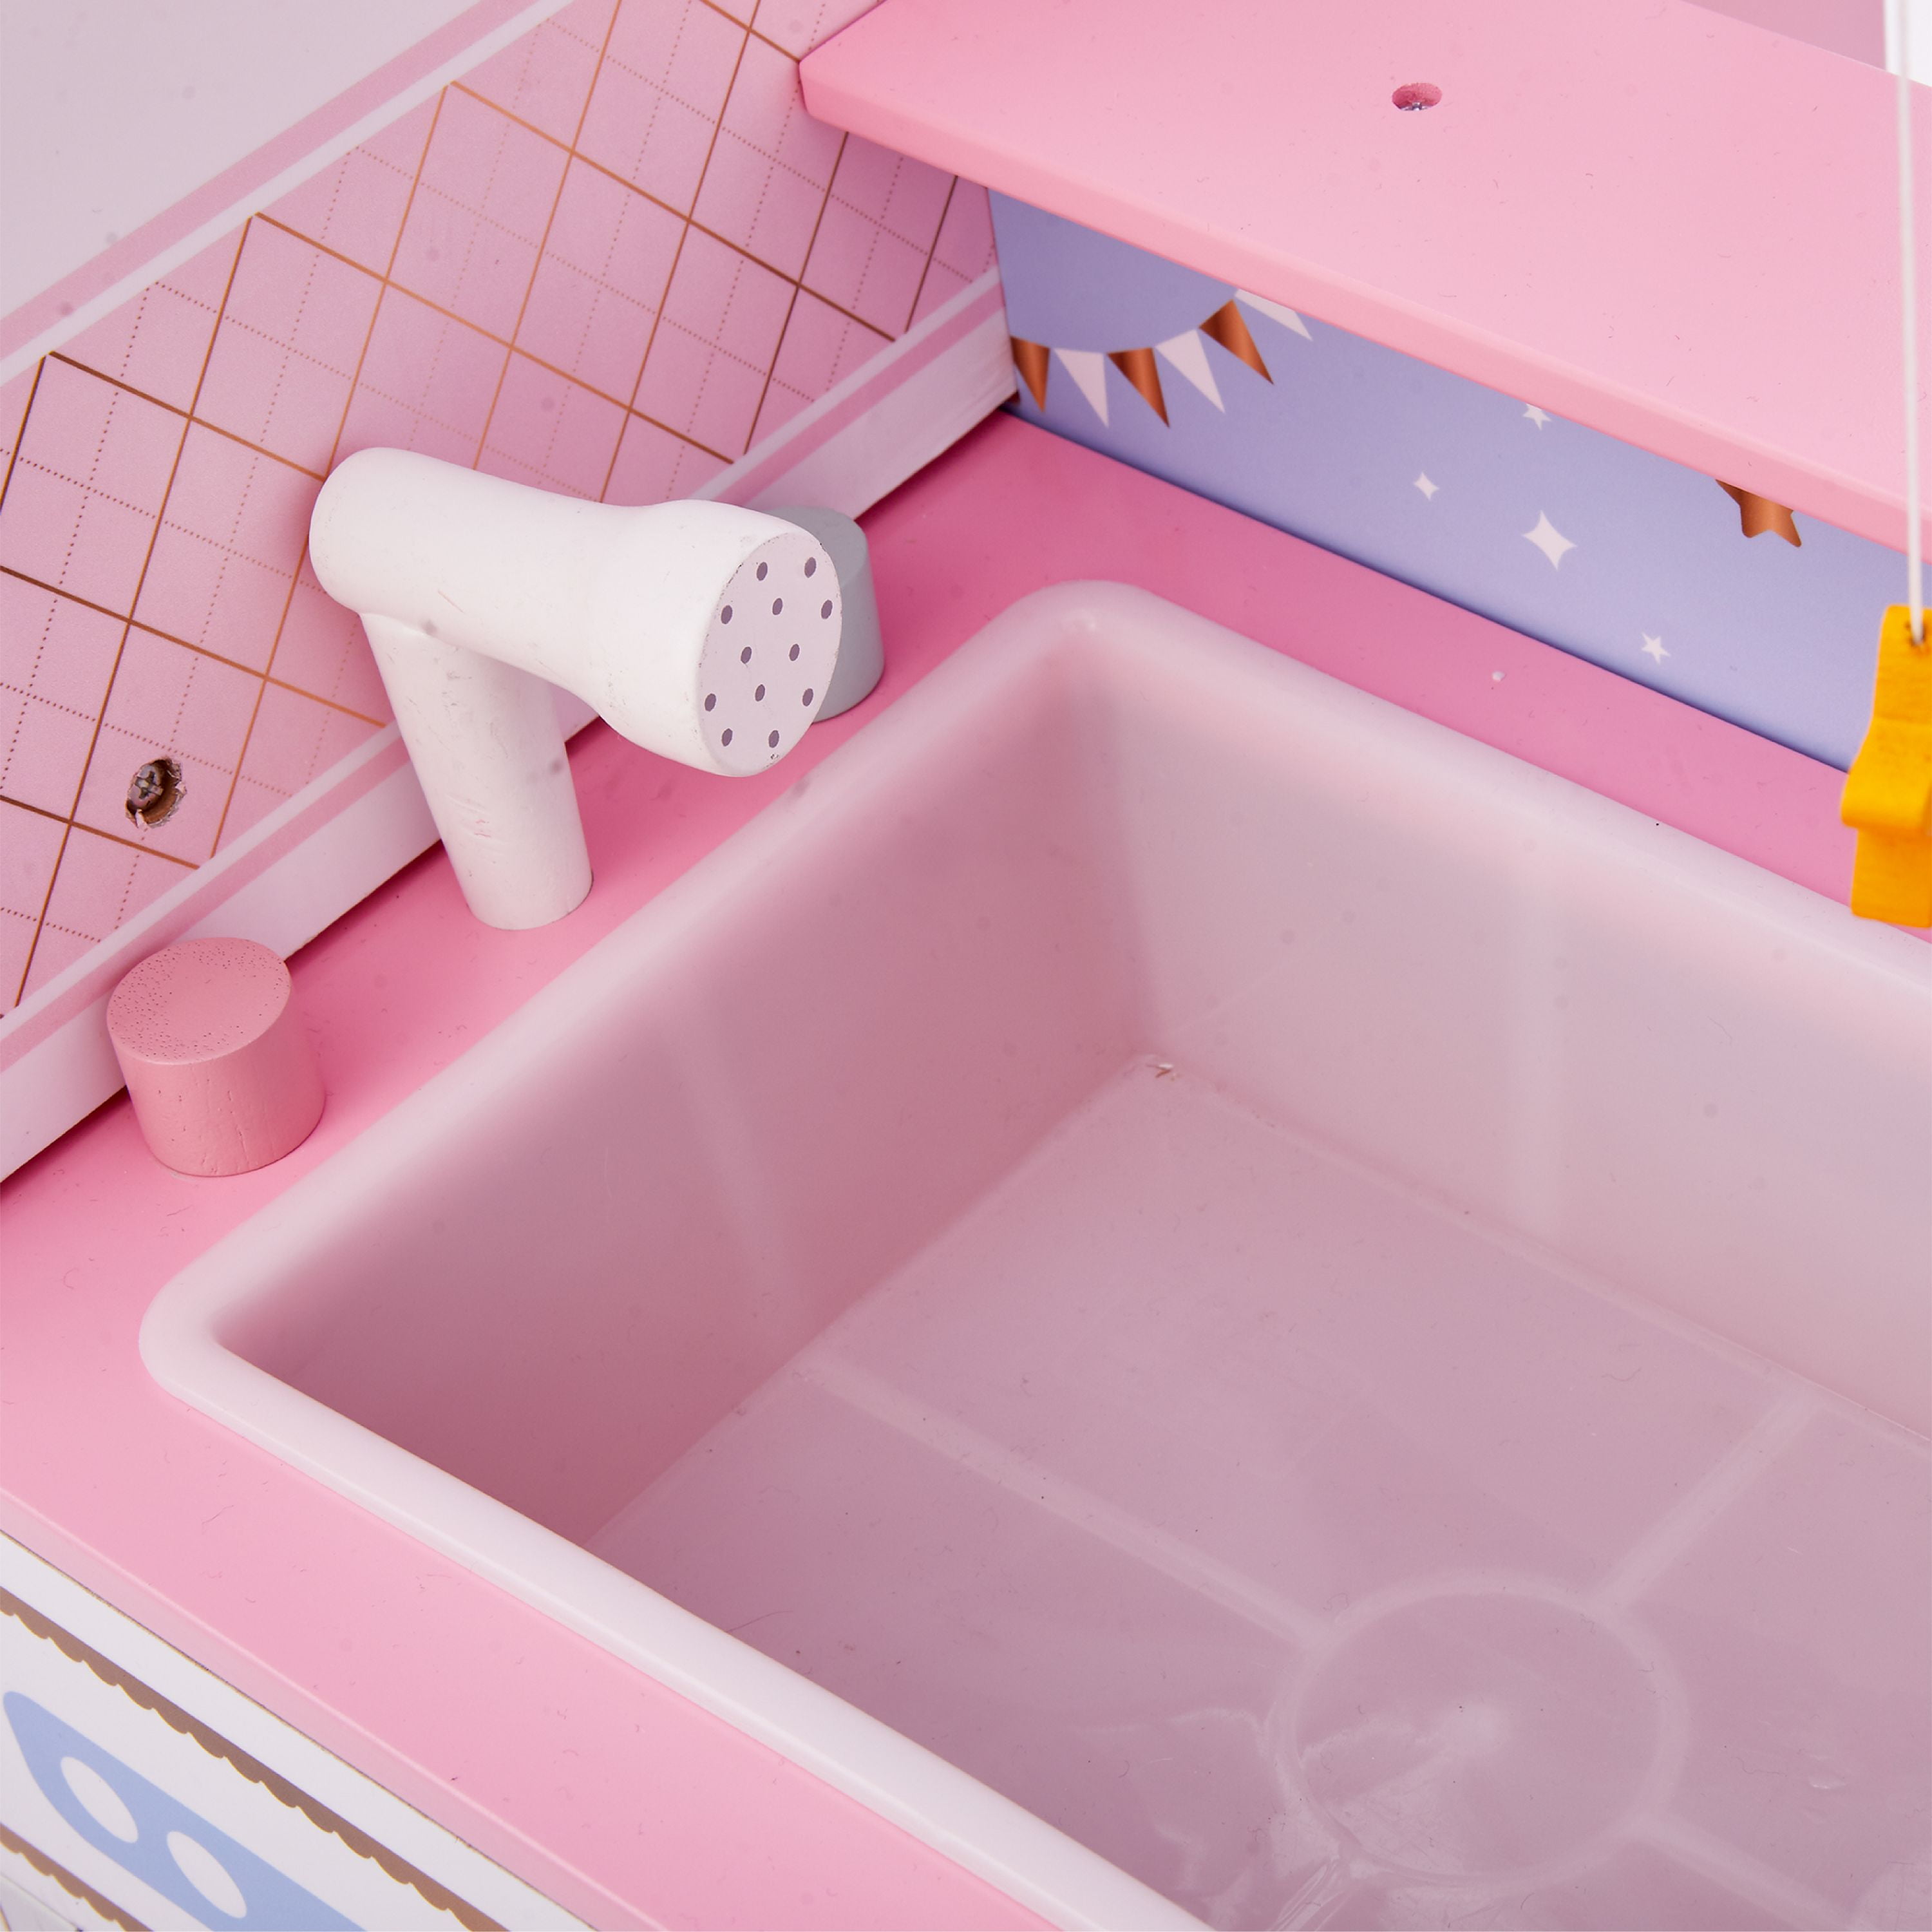 Olivia's Little World Baby Doll Changing Station With Storage, Dollhouses, Baby & Toys